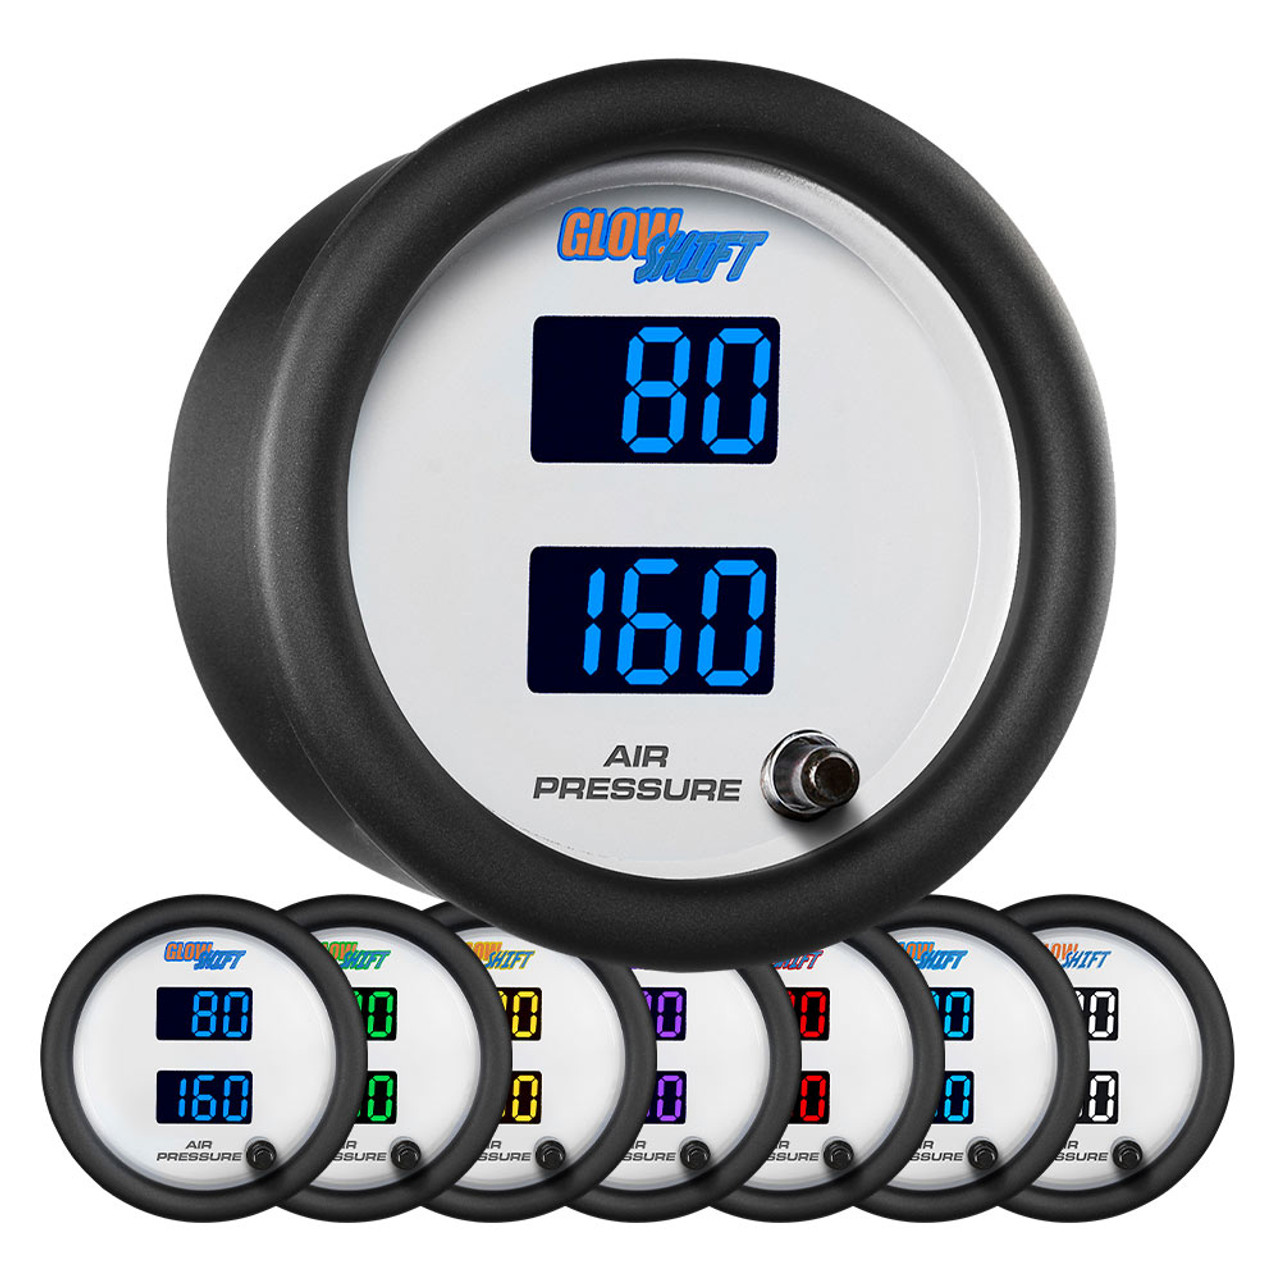  GlowShift 10 Color Digital Air Temperature Gauge Kit - Reads  Outside Air Temp from -40-200 Degrees F - Includes Sensor - Multi-Color LED  Display - Tinted Lens - 2-1/16 (52mm) : Automotive